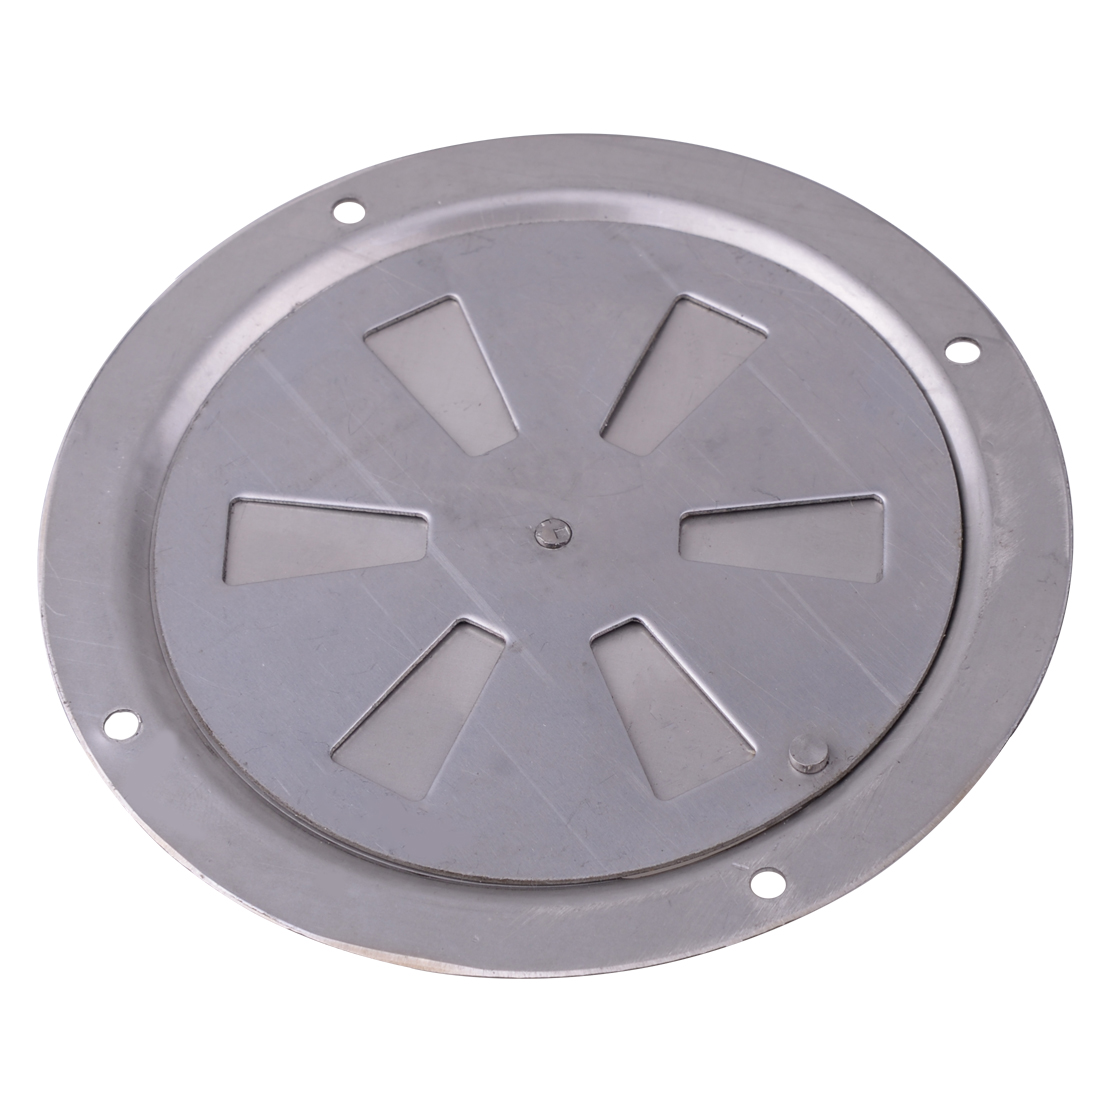 4" Round Butterfly Ventilator Vent Cover Stainless Marine Boat Hardware eBay